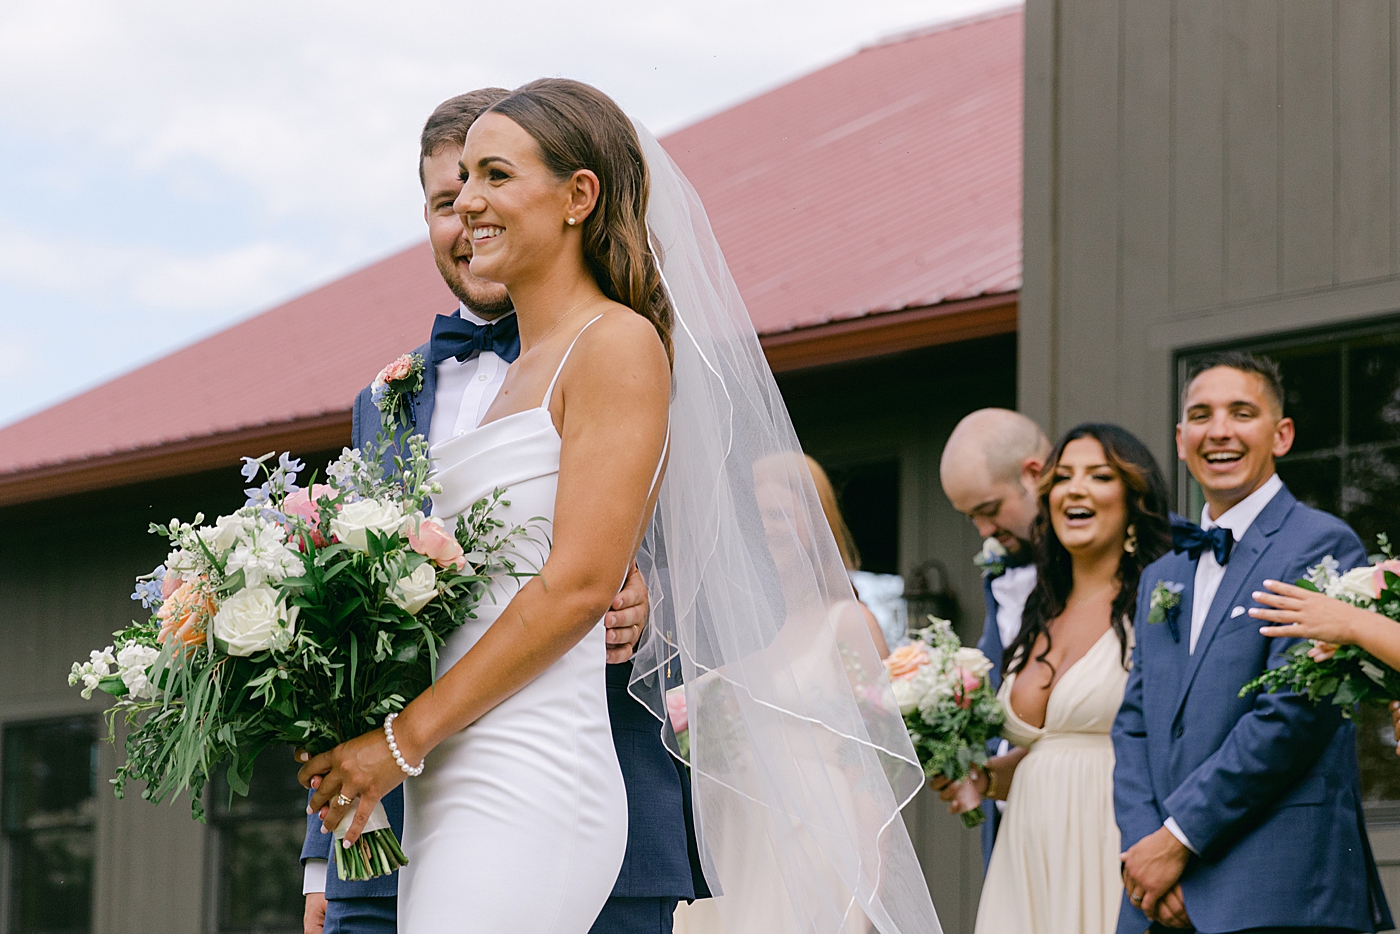 Bride and groom laughing during wedding party photos | Image by Hope Helmuth Photography